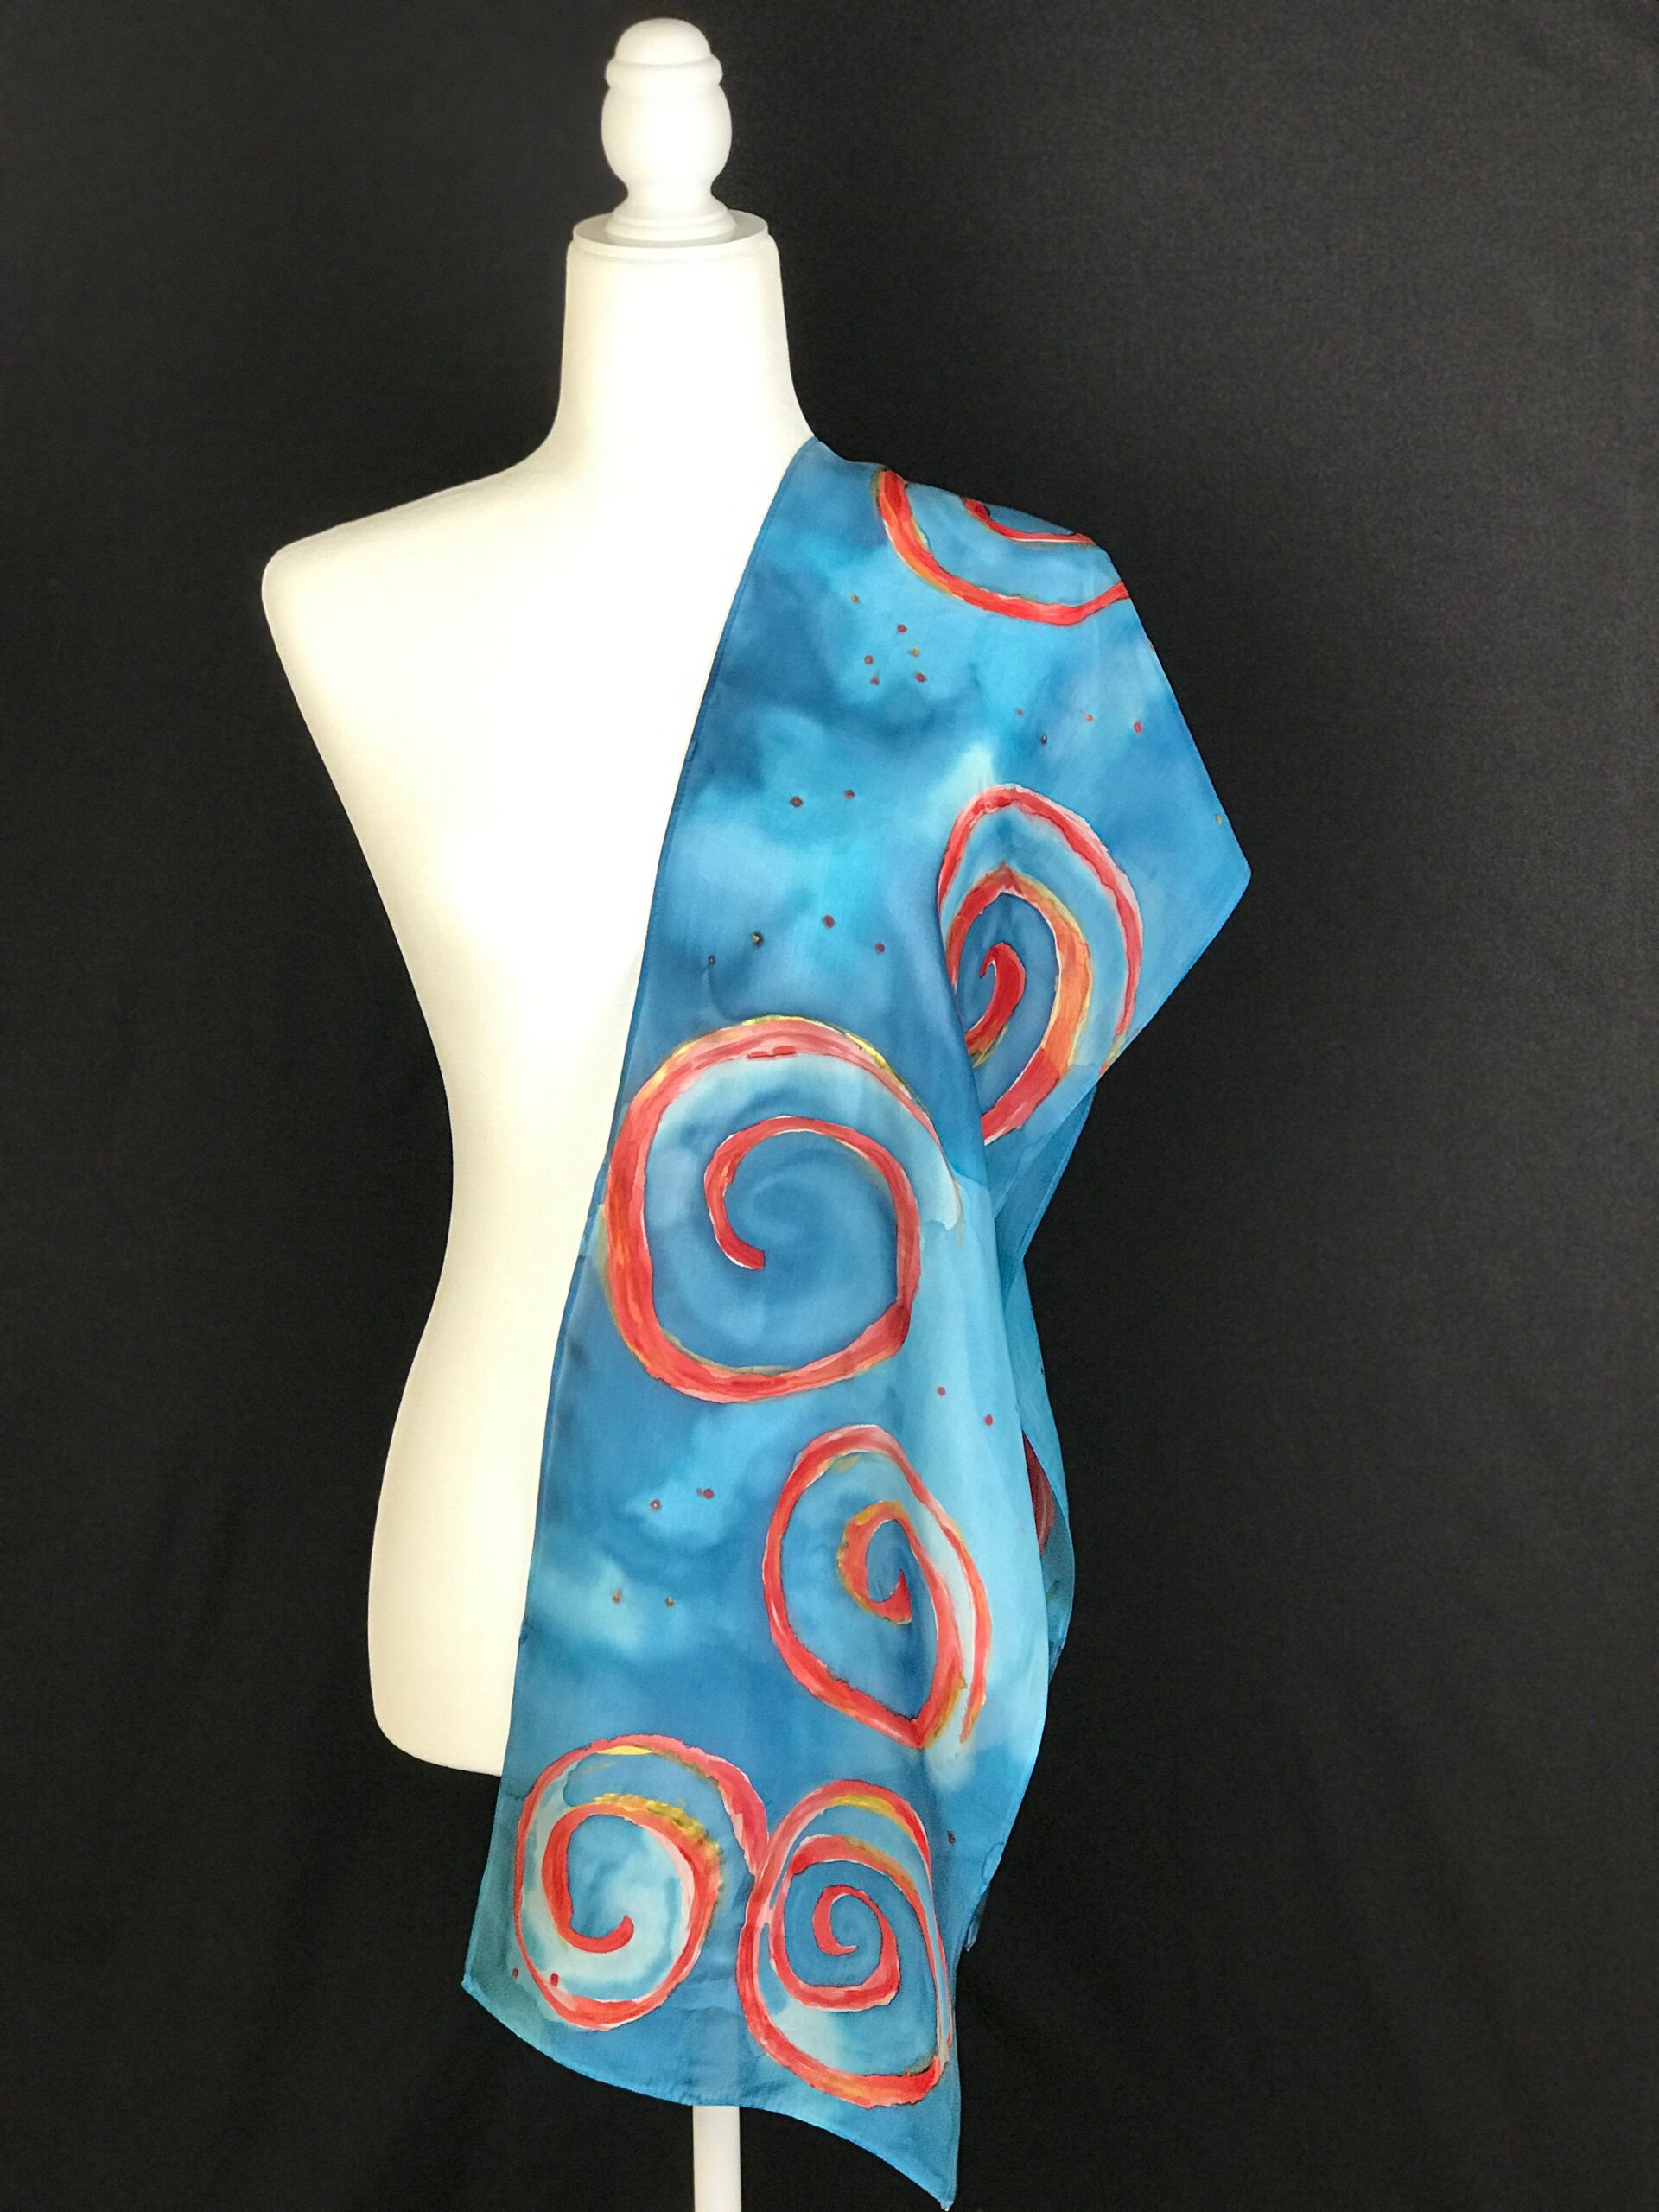 luxury gift for herfriend artistic hair accessory. floral geometric modern scarf Unique Fashion accessory Hand painted silk scarf